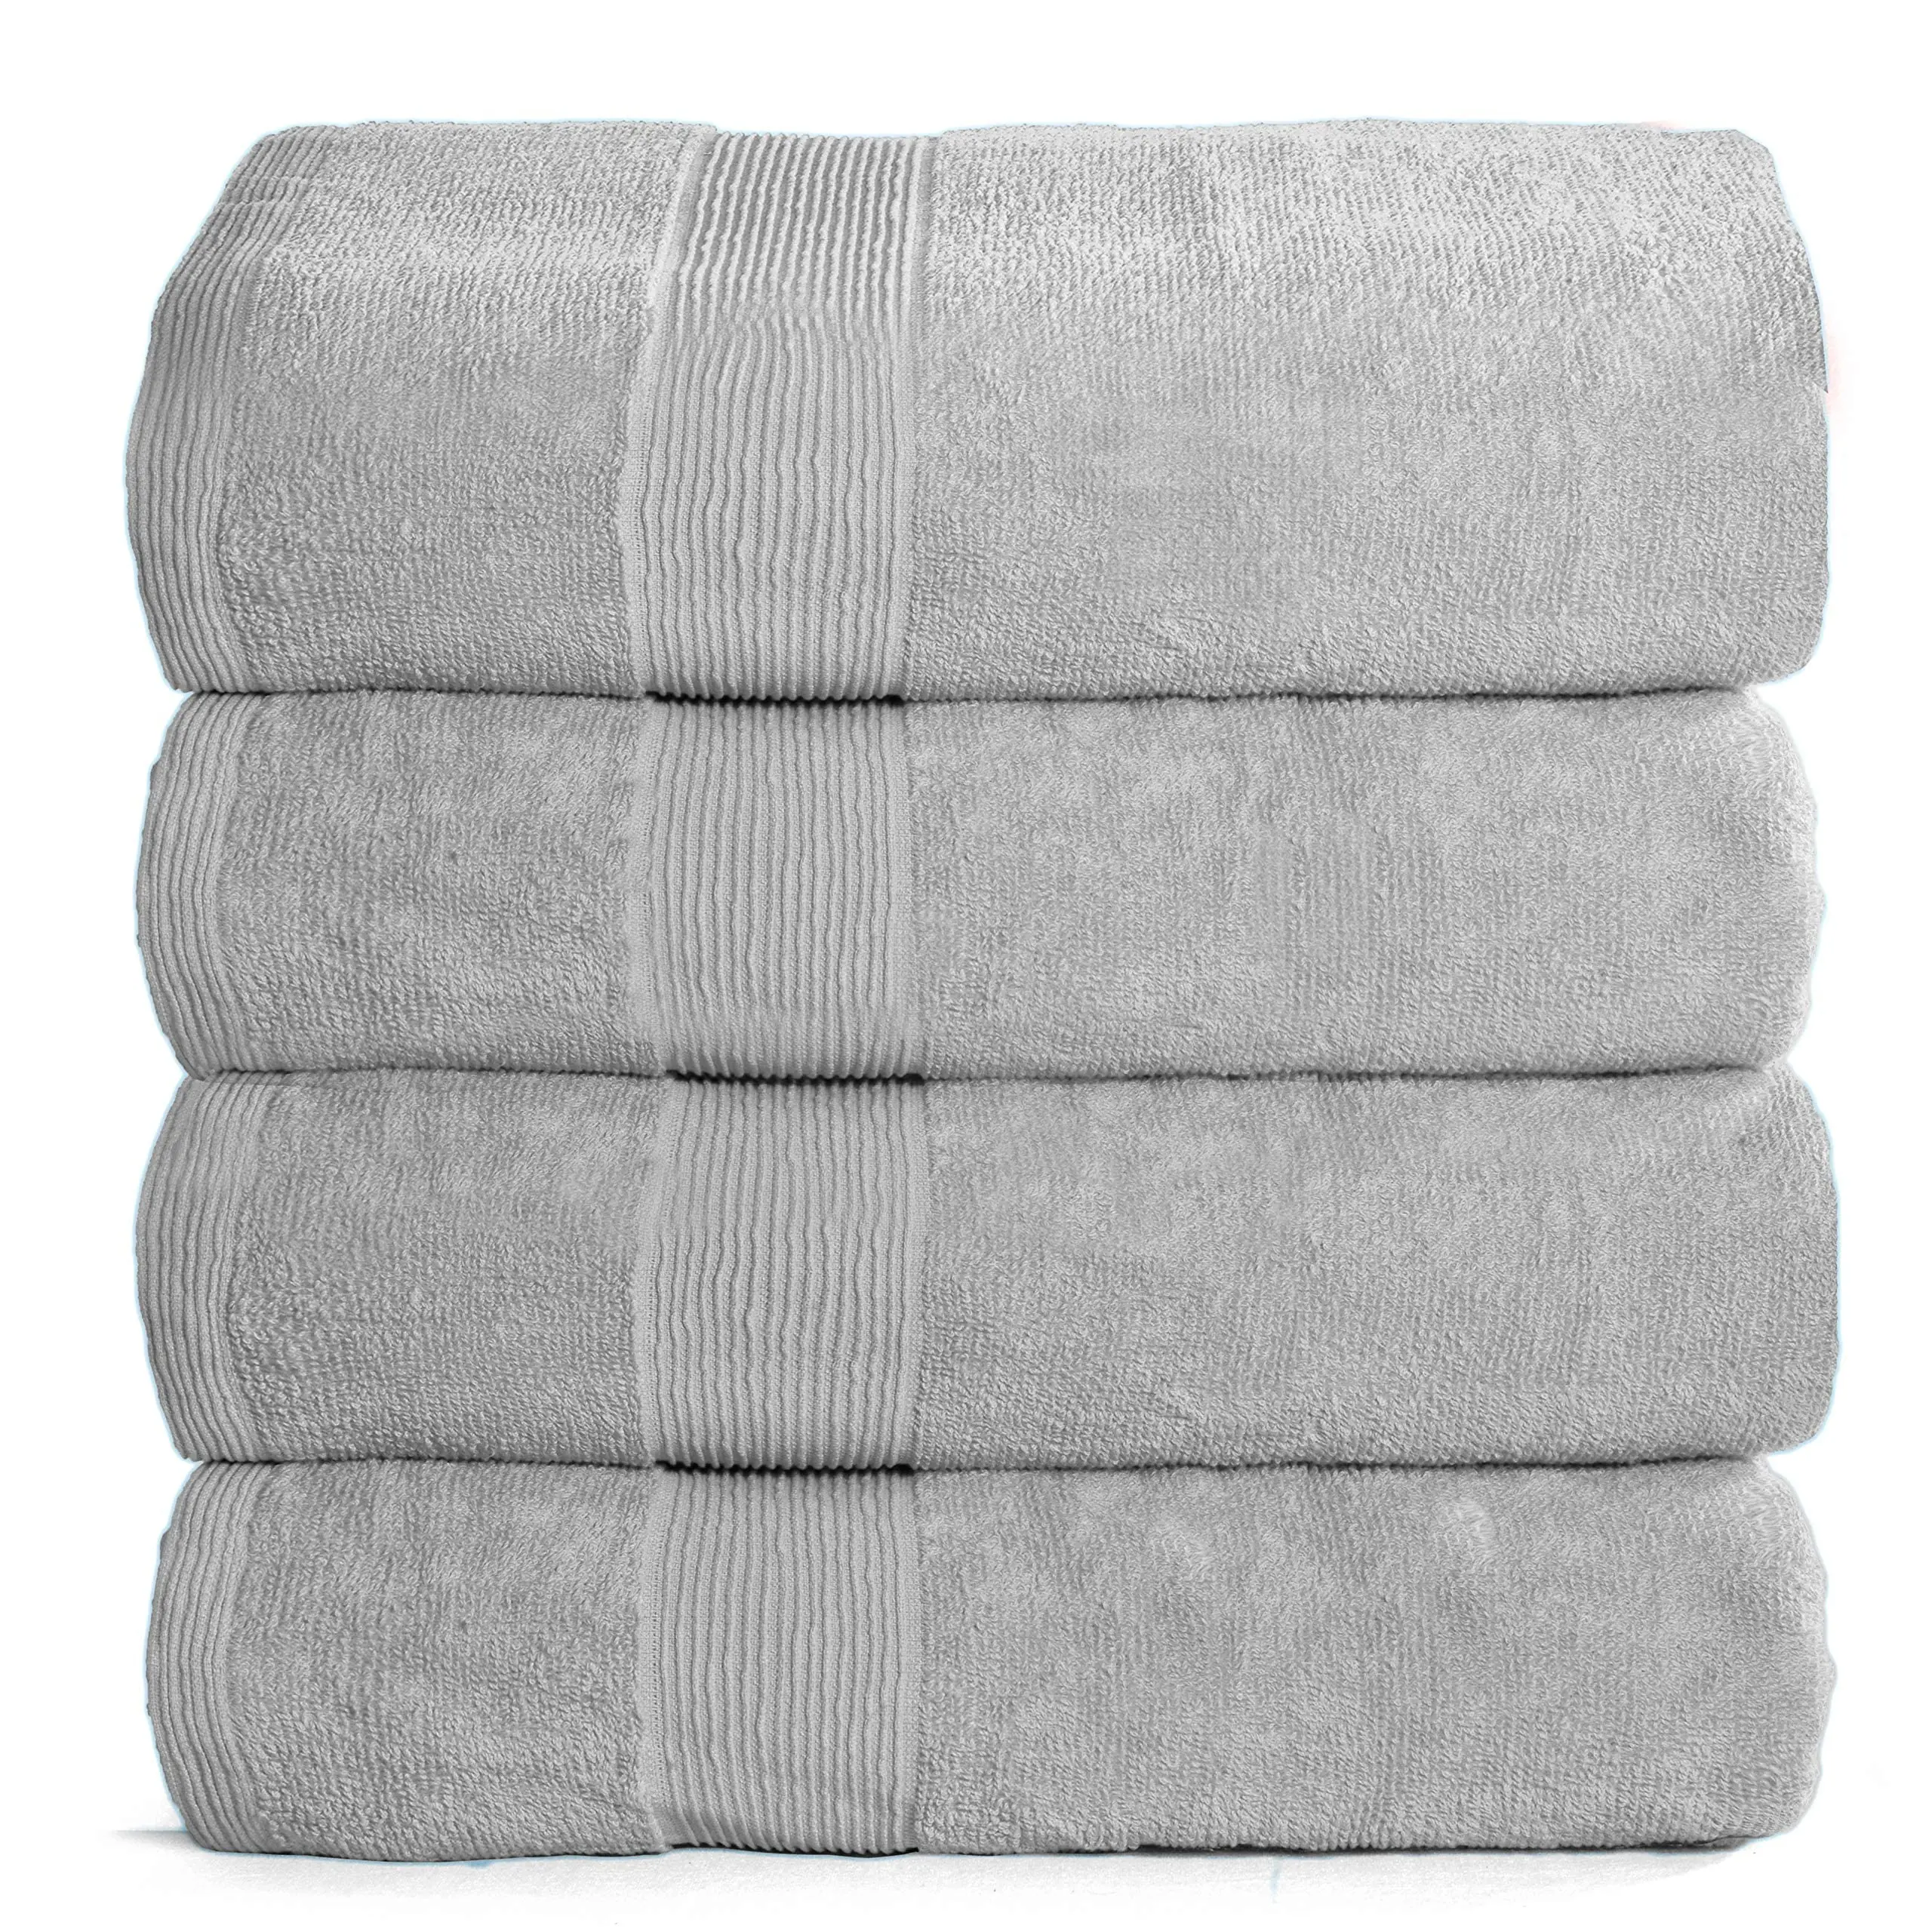 

Quick-Dry Bath Towel, Ultra Soft, Highly Absorbent, Machine Washable, Hotel, Spa Quality, 100% Premium Cotton, 27x54 Inch